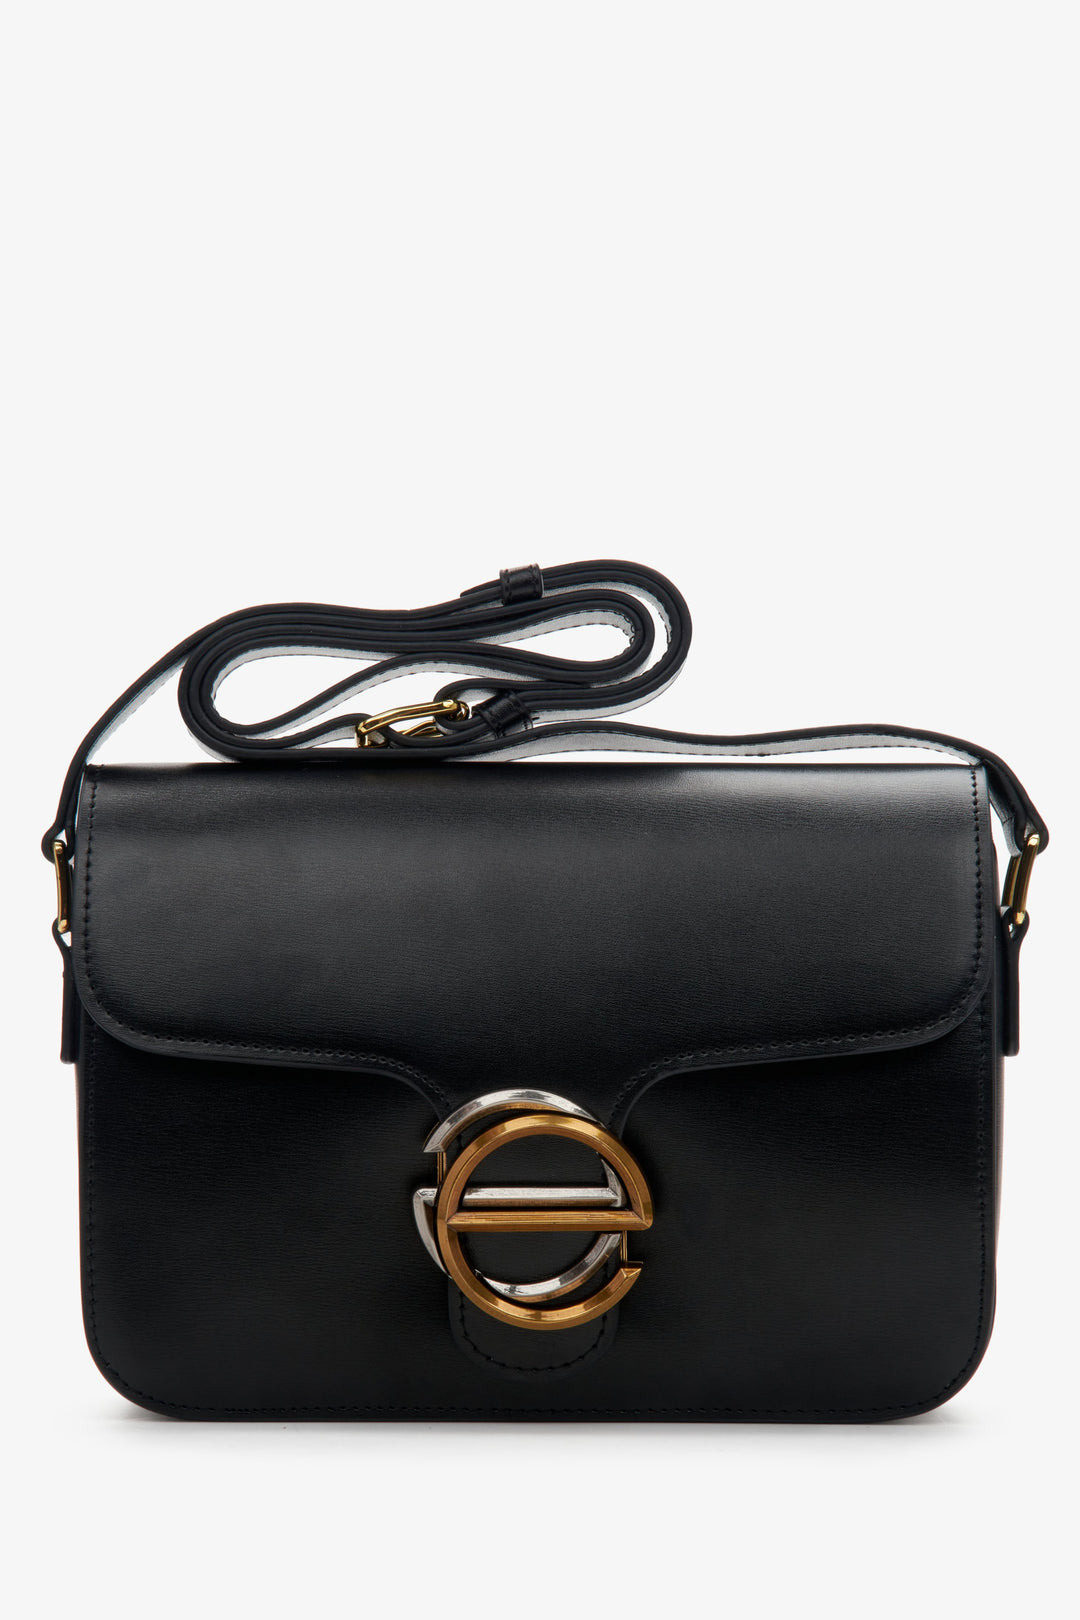 Women's small black handbag with gold hardware made of leather by Estro.